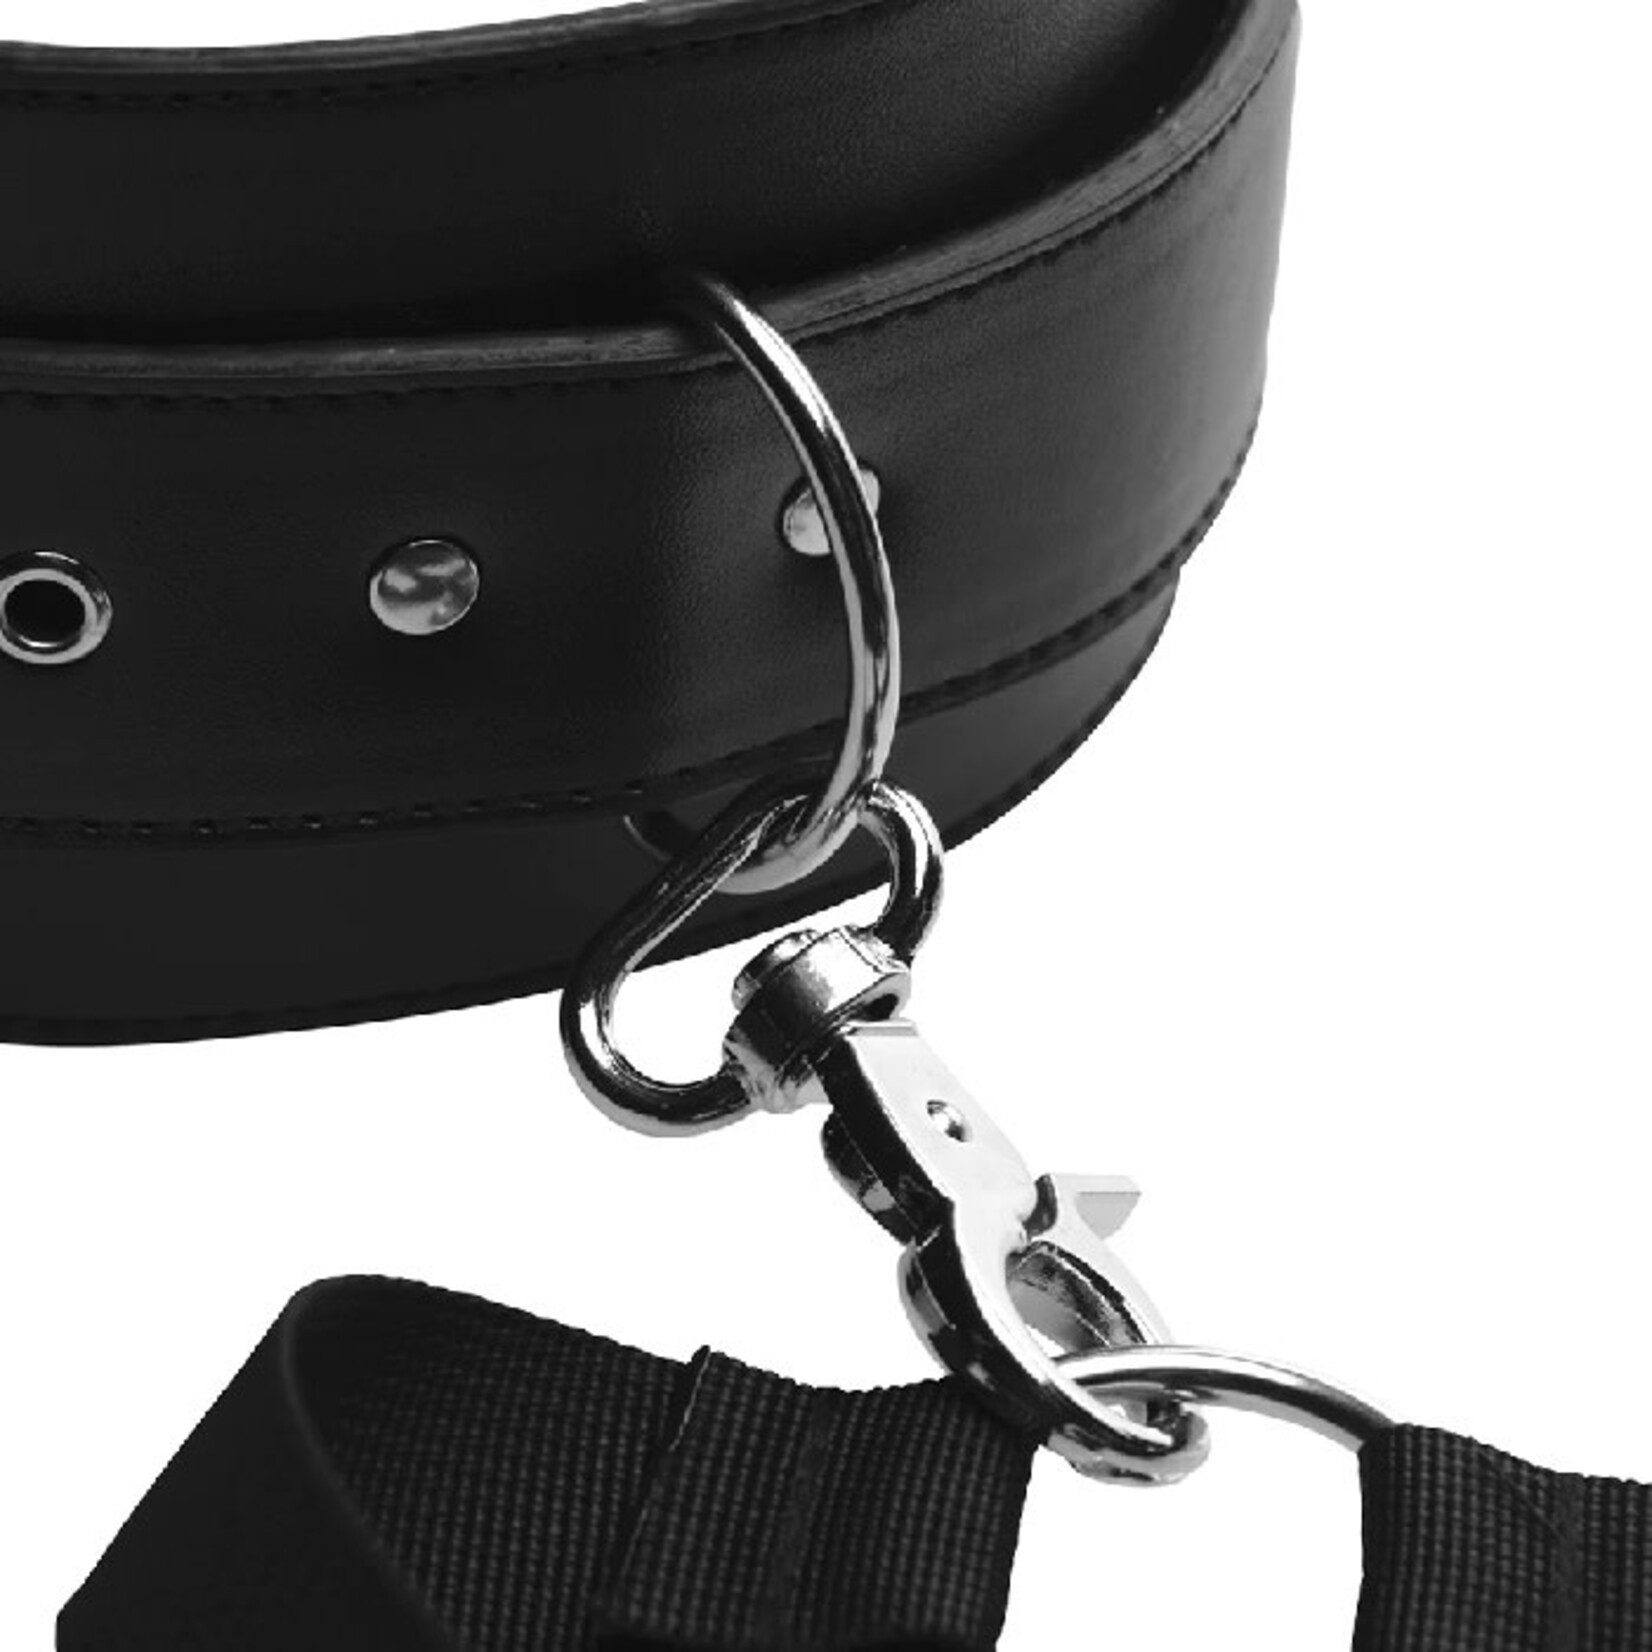 MASTER SERIES MASTER SERIES ACQUIRE THIGH HARNESS WITH CUFFS